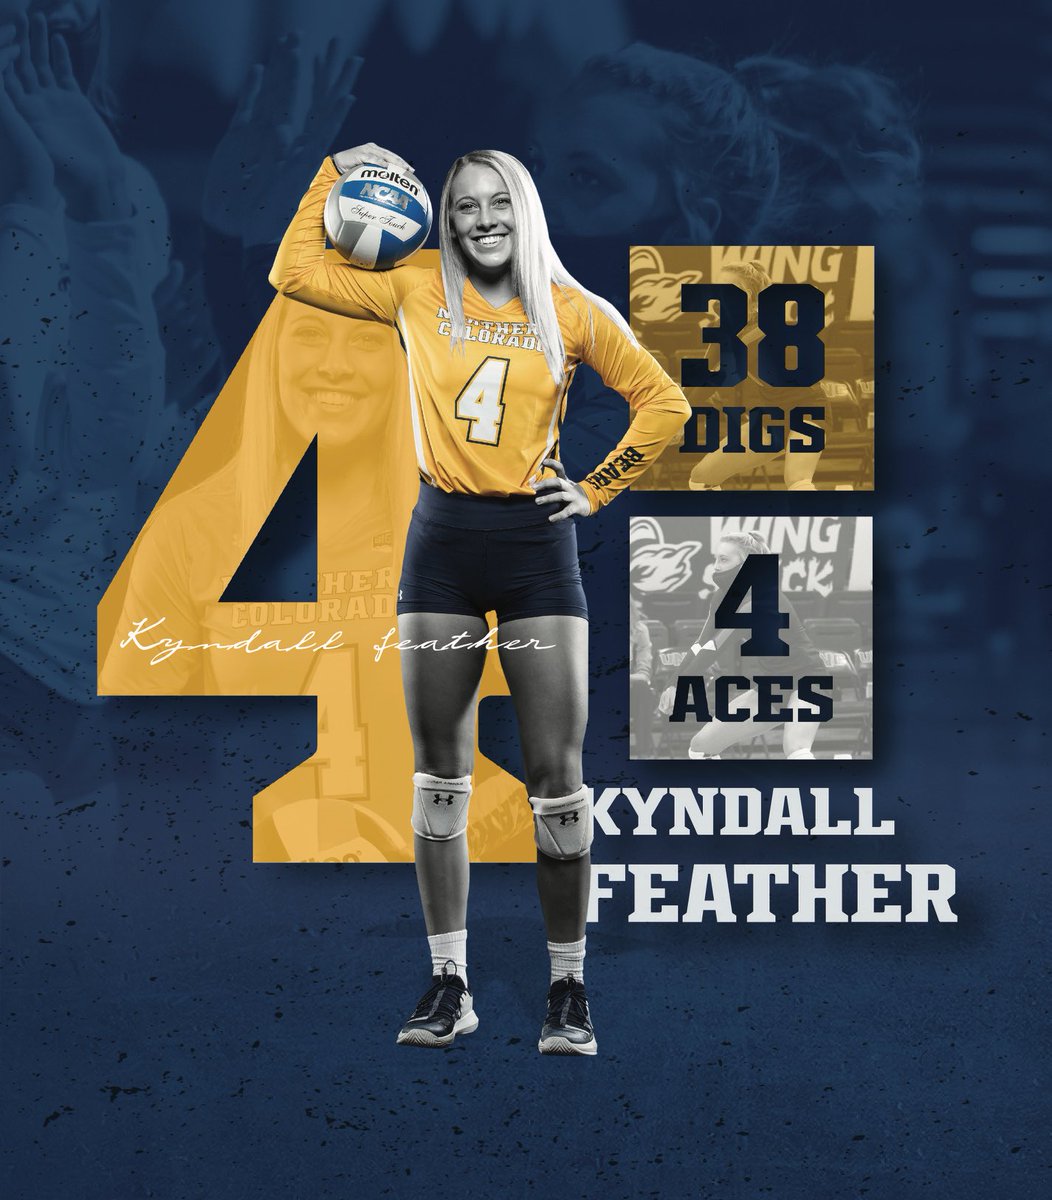 @kyndall_feather was 🔥 this past weekend vs. Idaho State averaging over 6 digs/set🐻🏐 #BearsStrong #BearPride